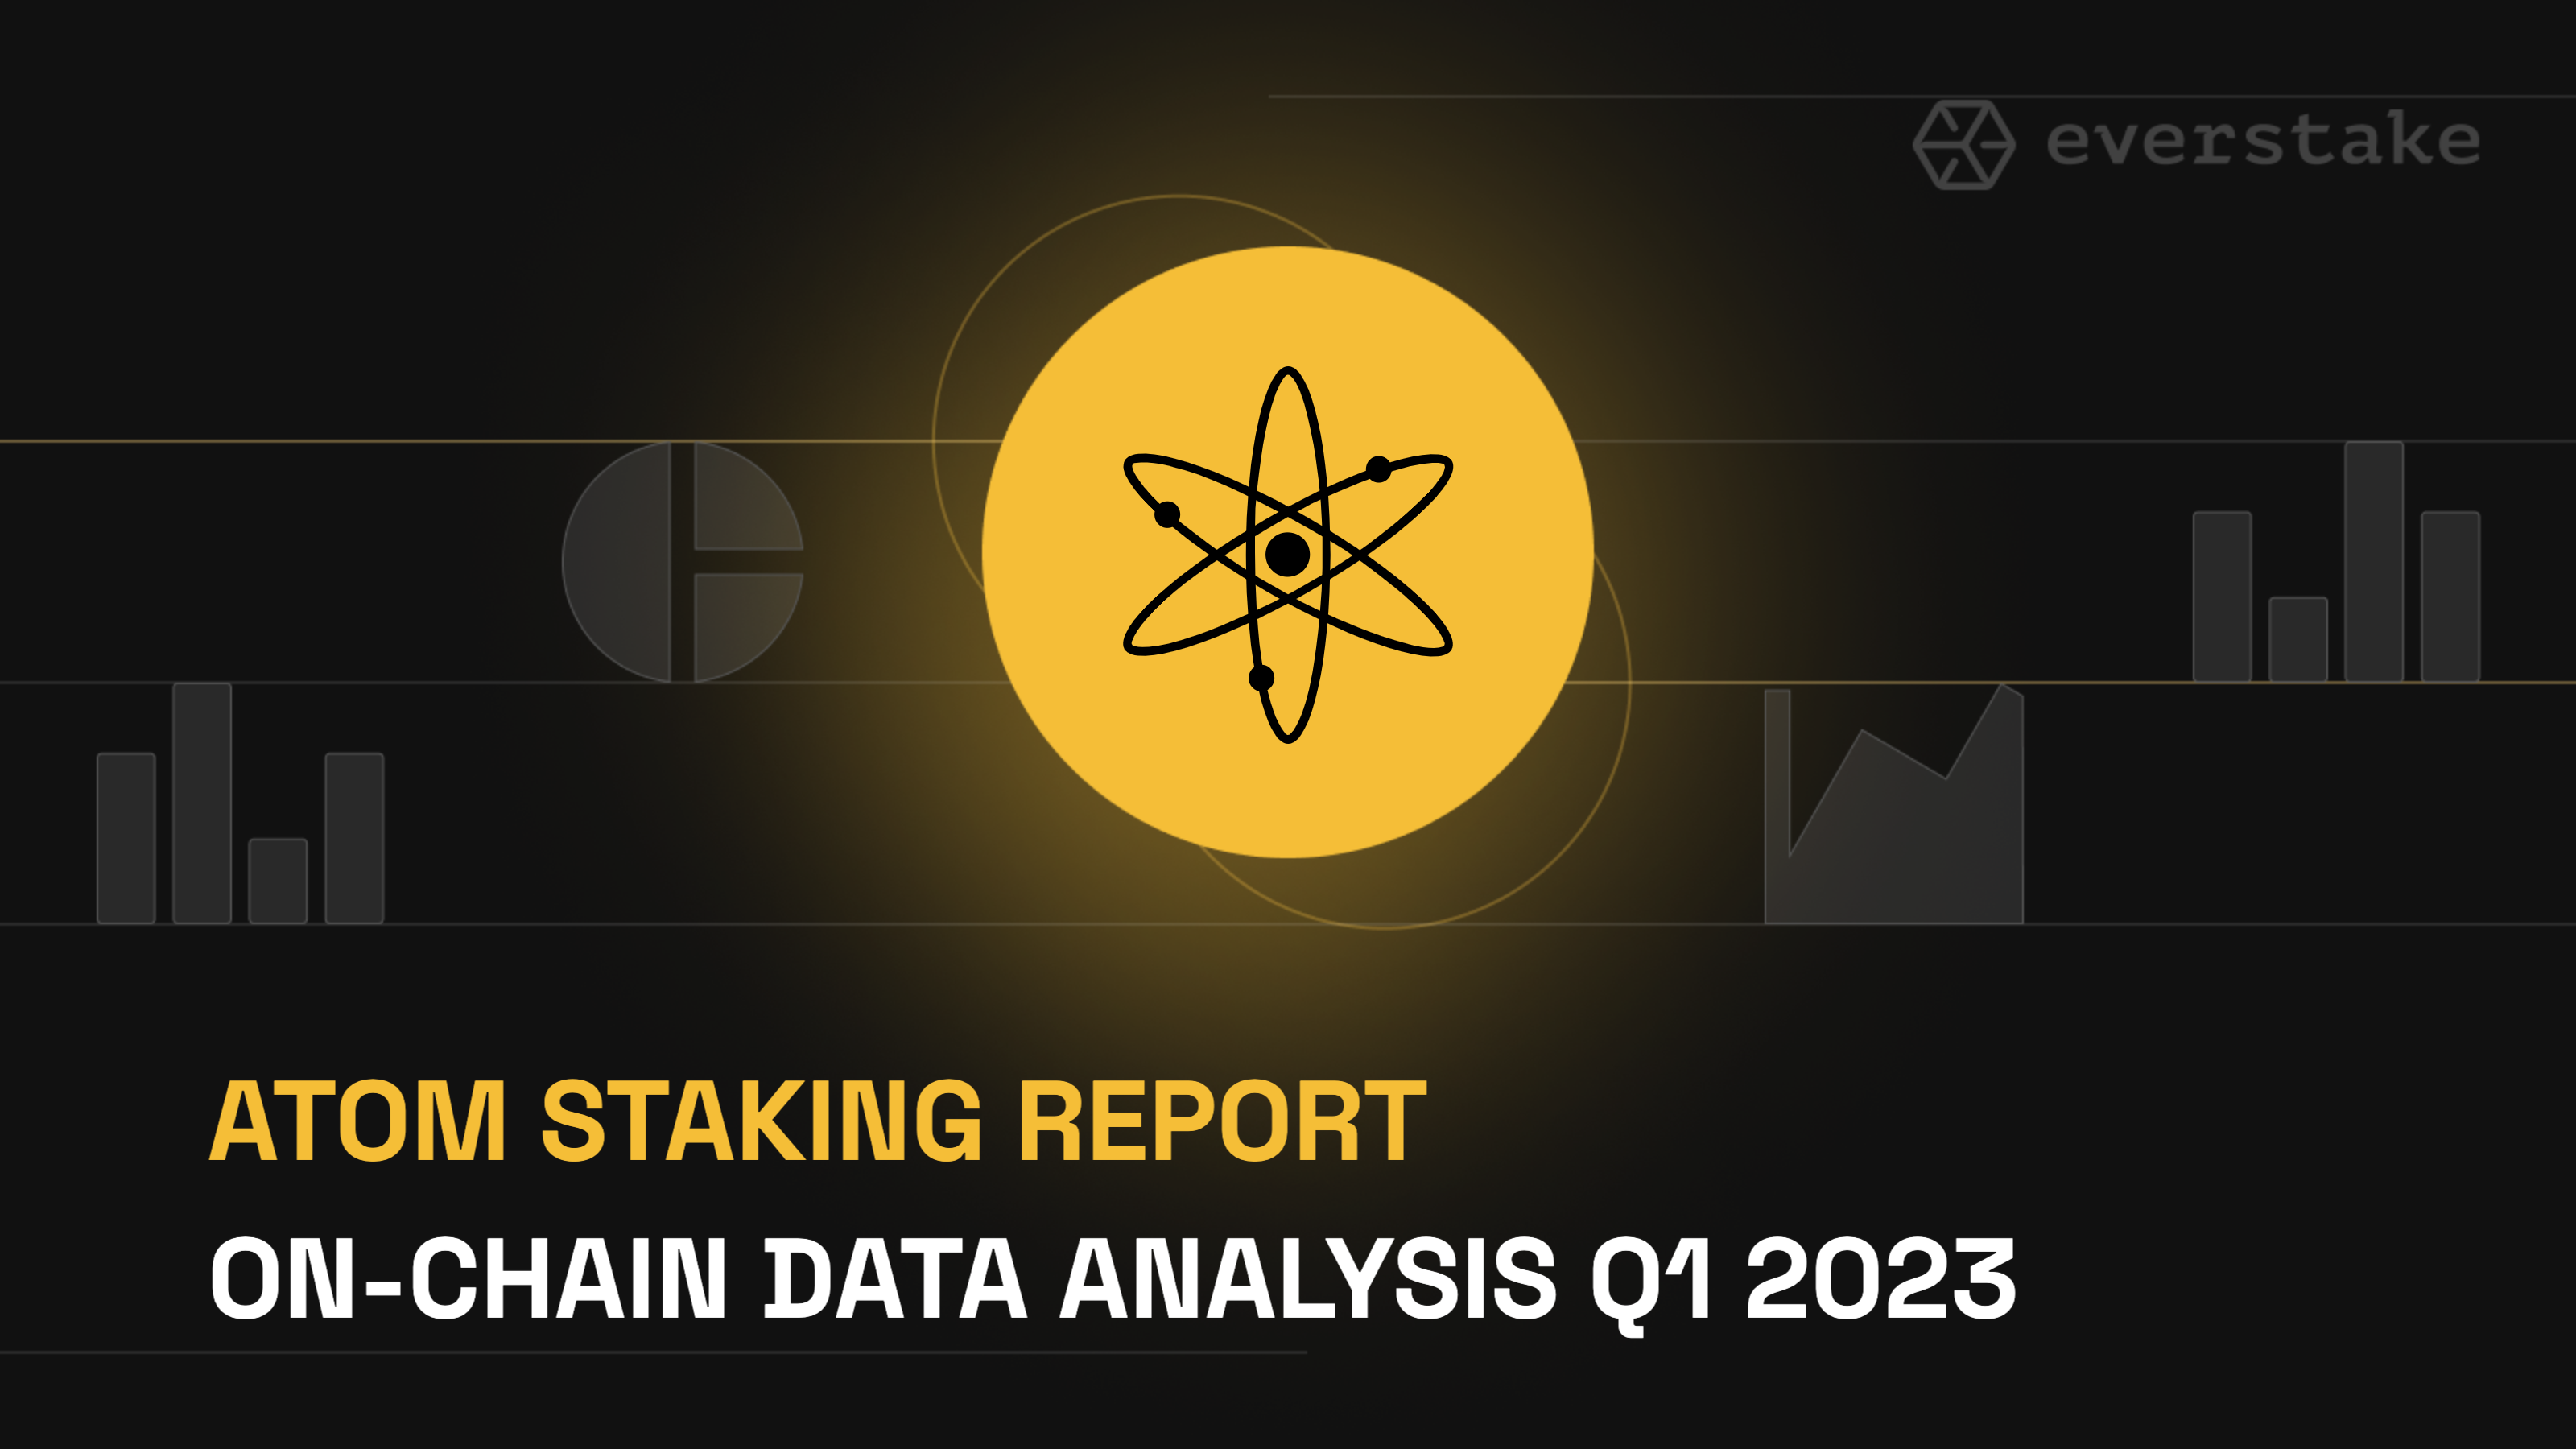 ATOM Staking Report: On-chain Data Analysis for Q1 2023